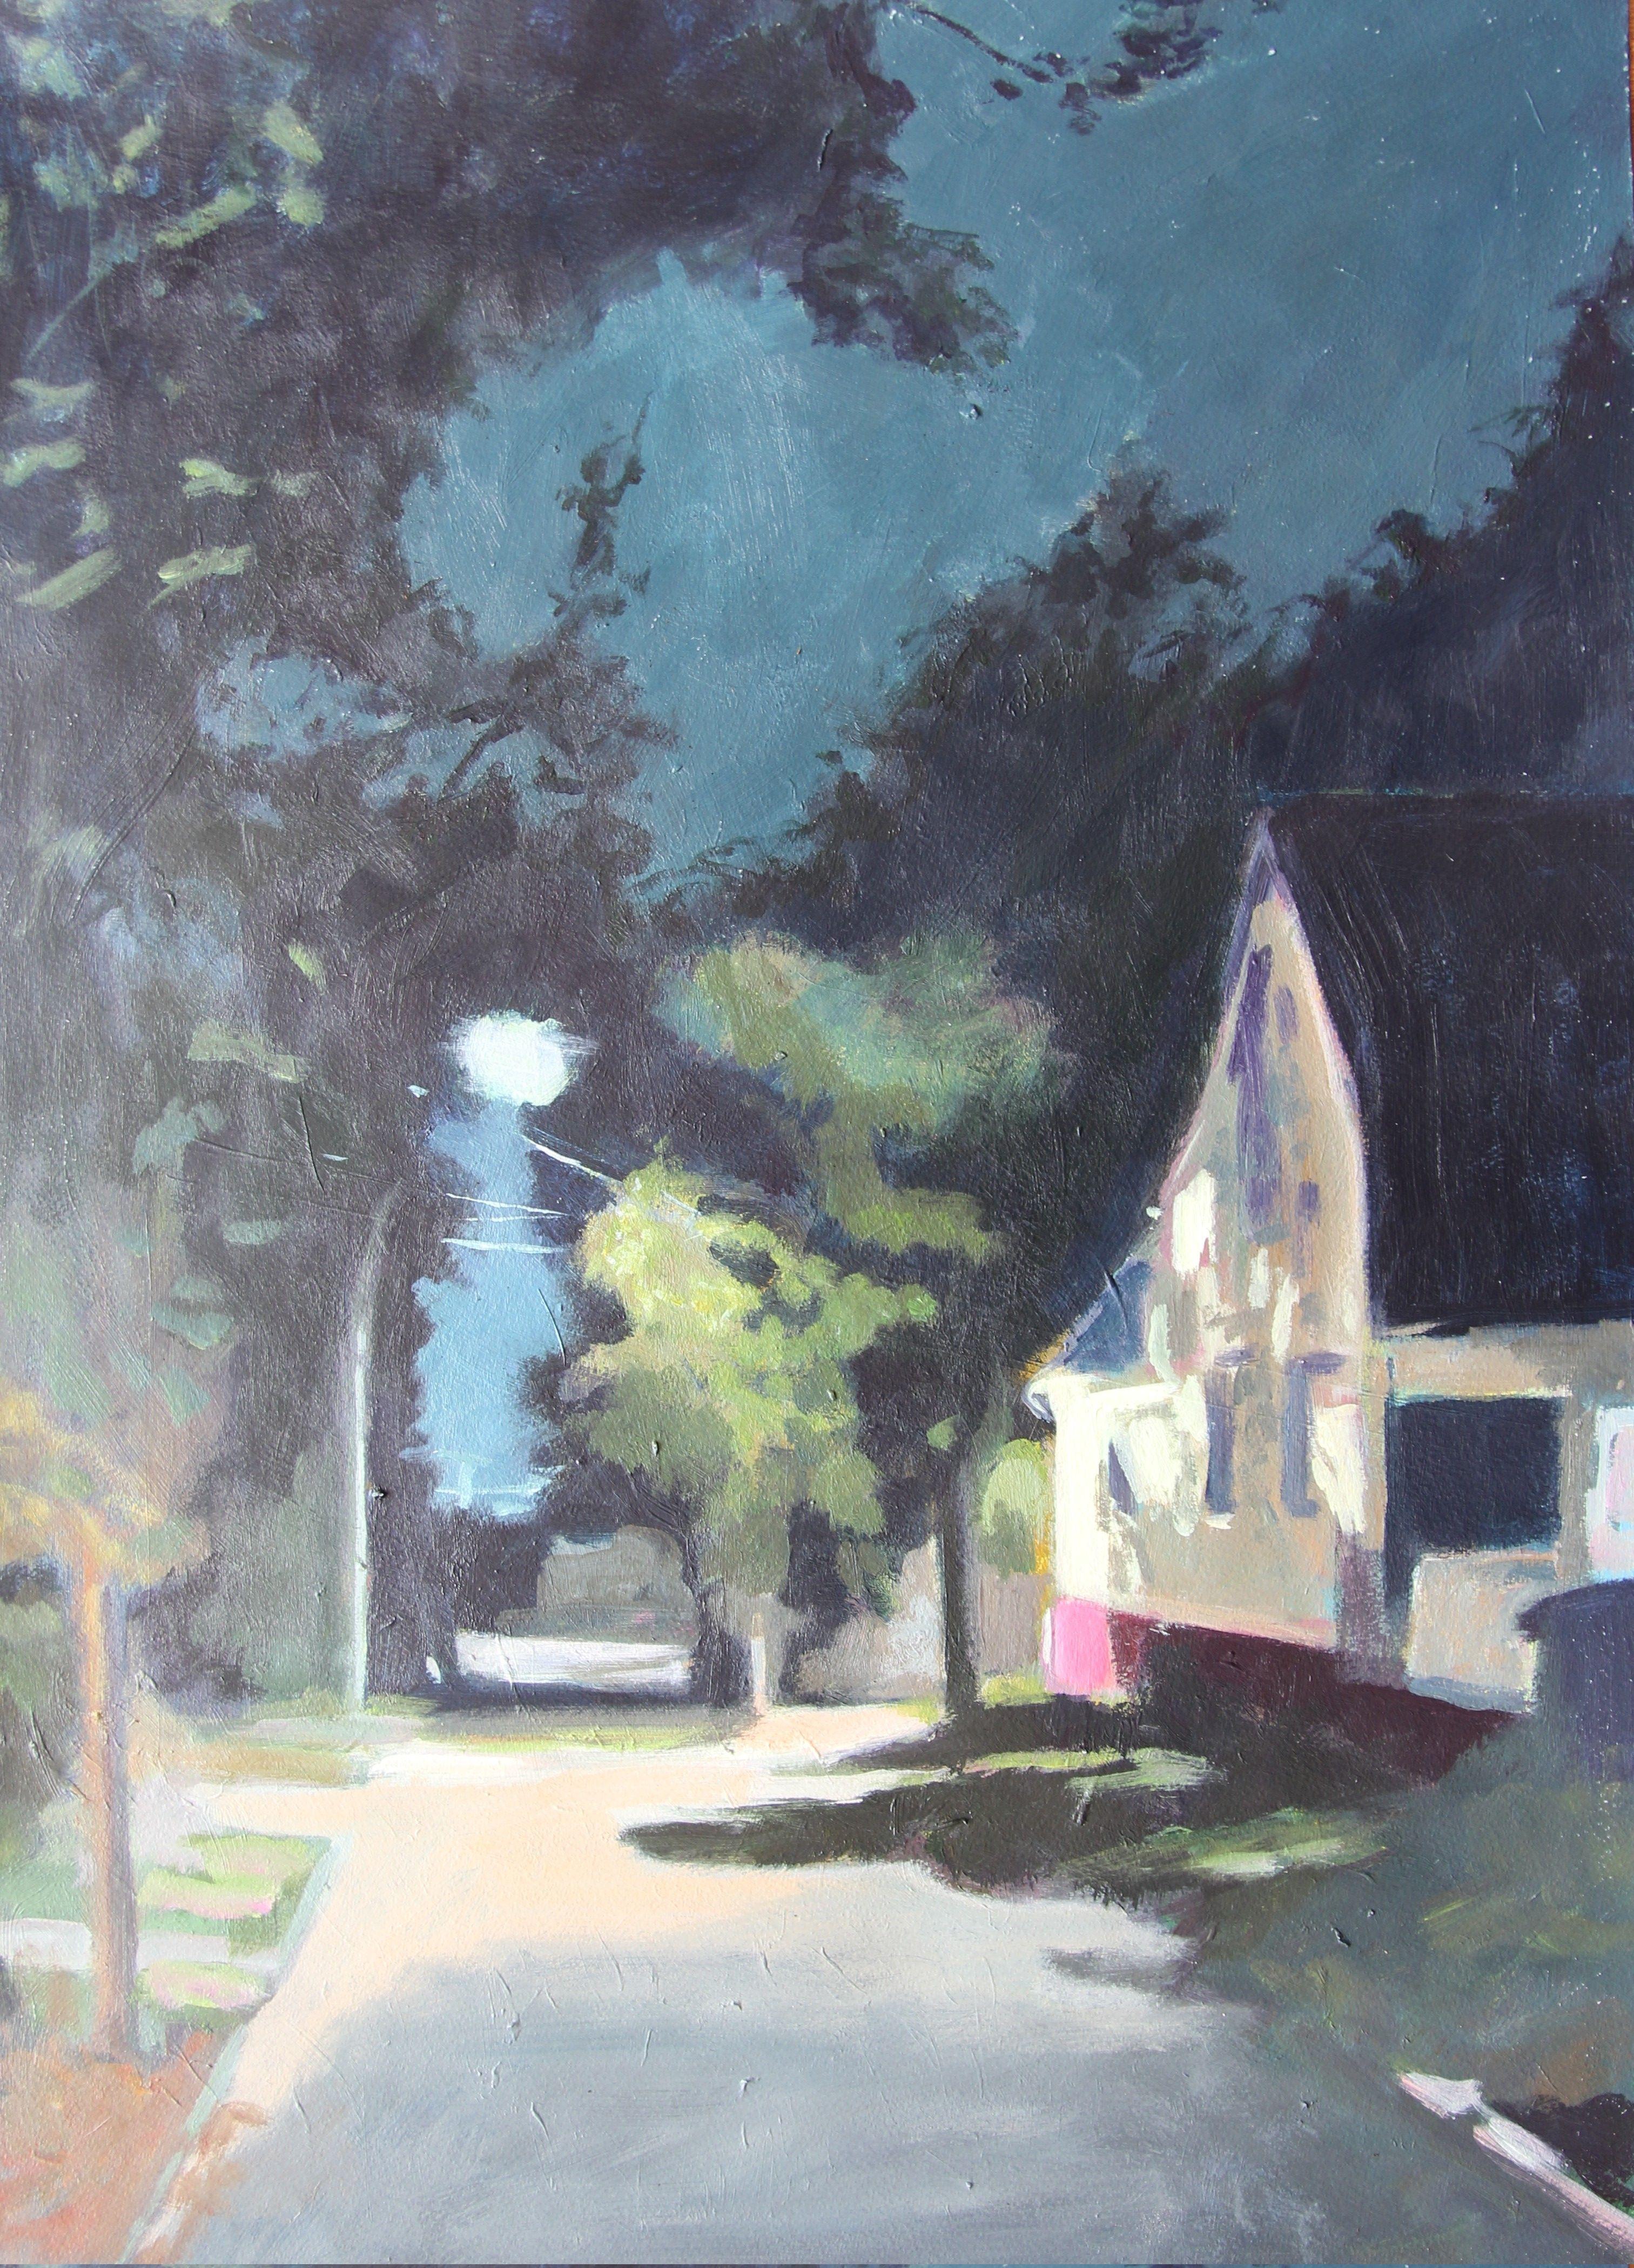 Acrylic work on archival quality paper. Depiction of a summer night in a suburb. I like walking at night in suburbs, especially in the summer. there is a certain quietness and mysterious atmosphere that attracts me. :: Painting :: Expressionism ::